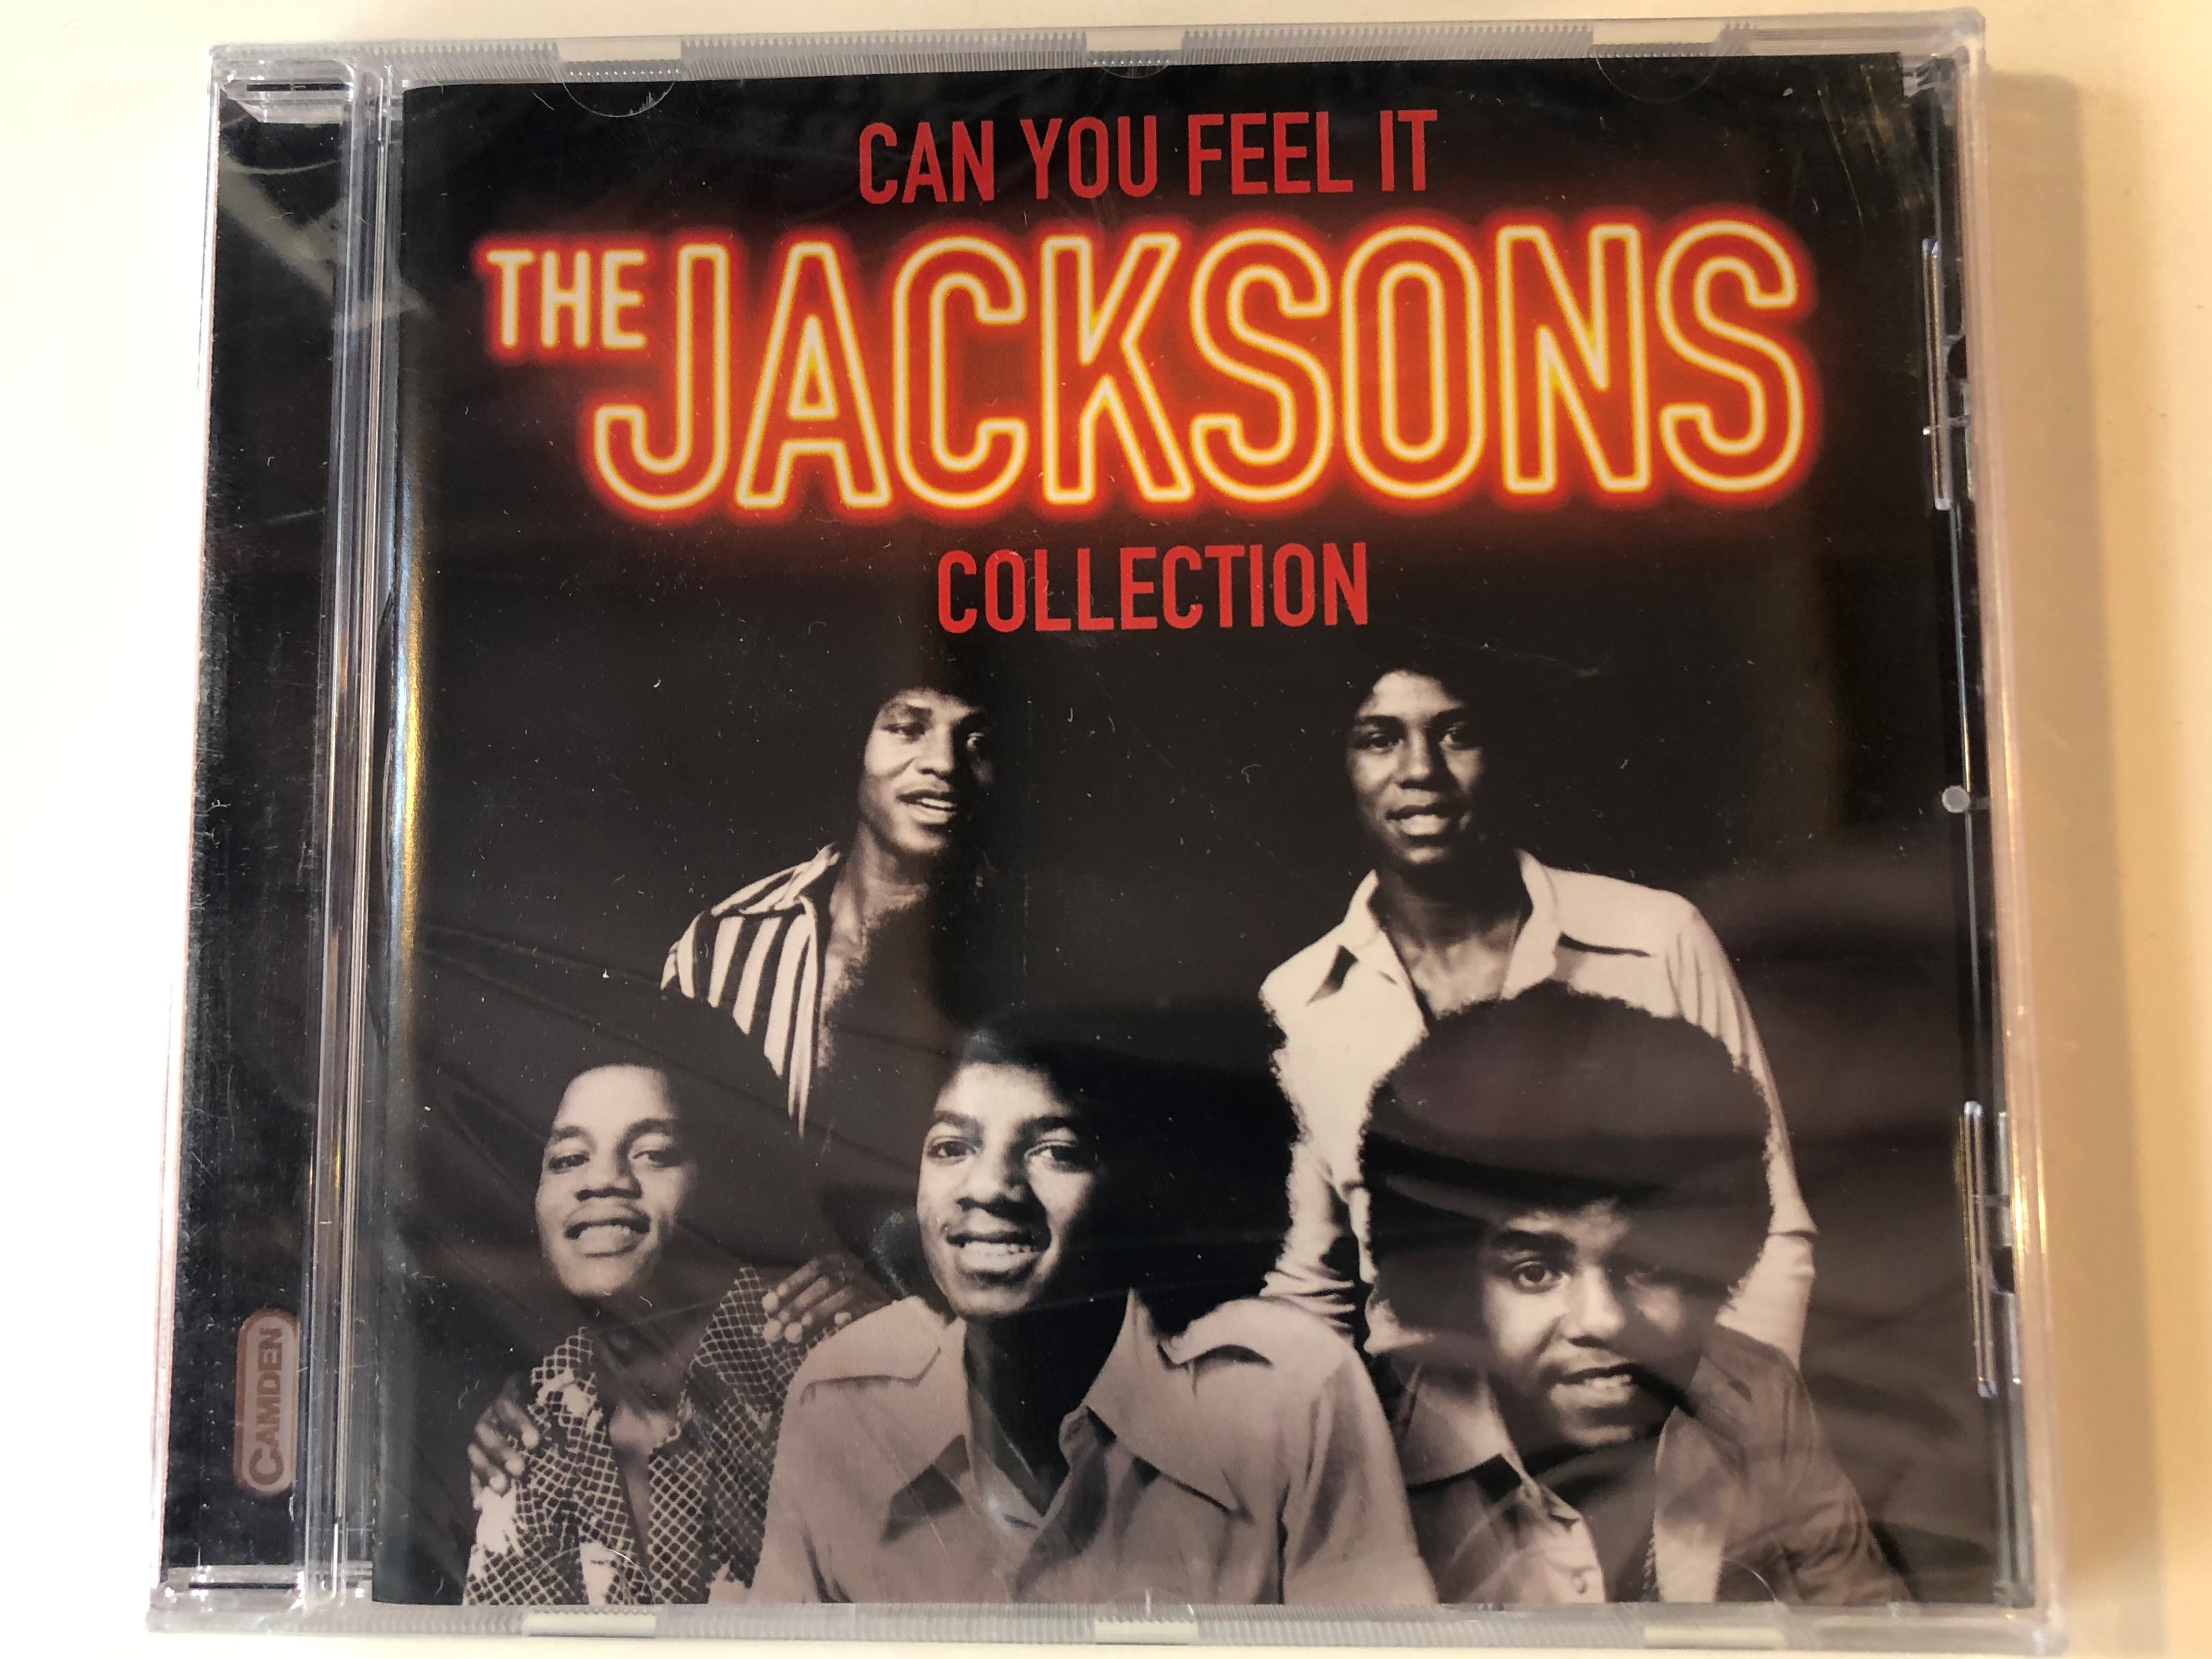 can-you-feel-it-the-jacksons-collection-sony-music-audio-cd-2009-88697473382-1-.jpg